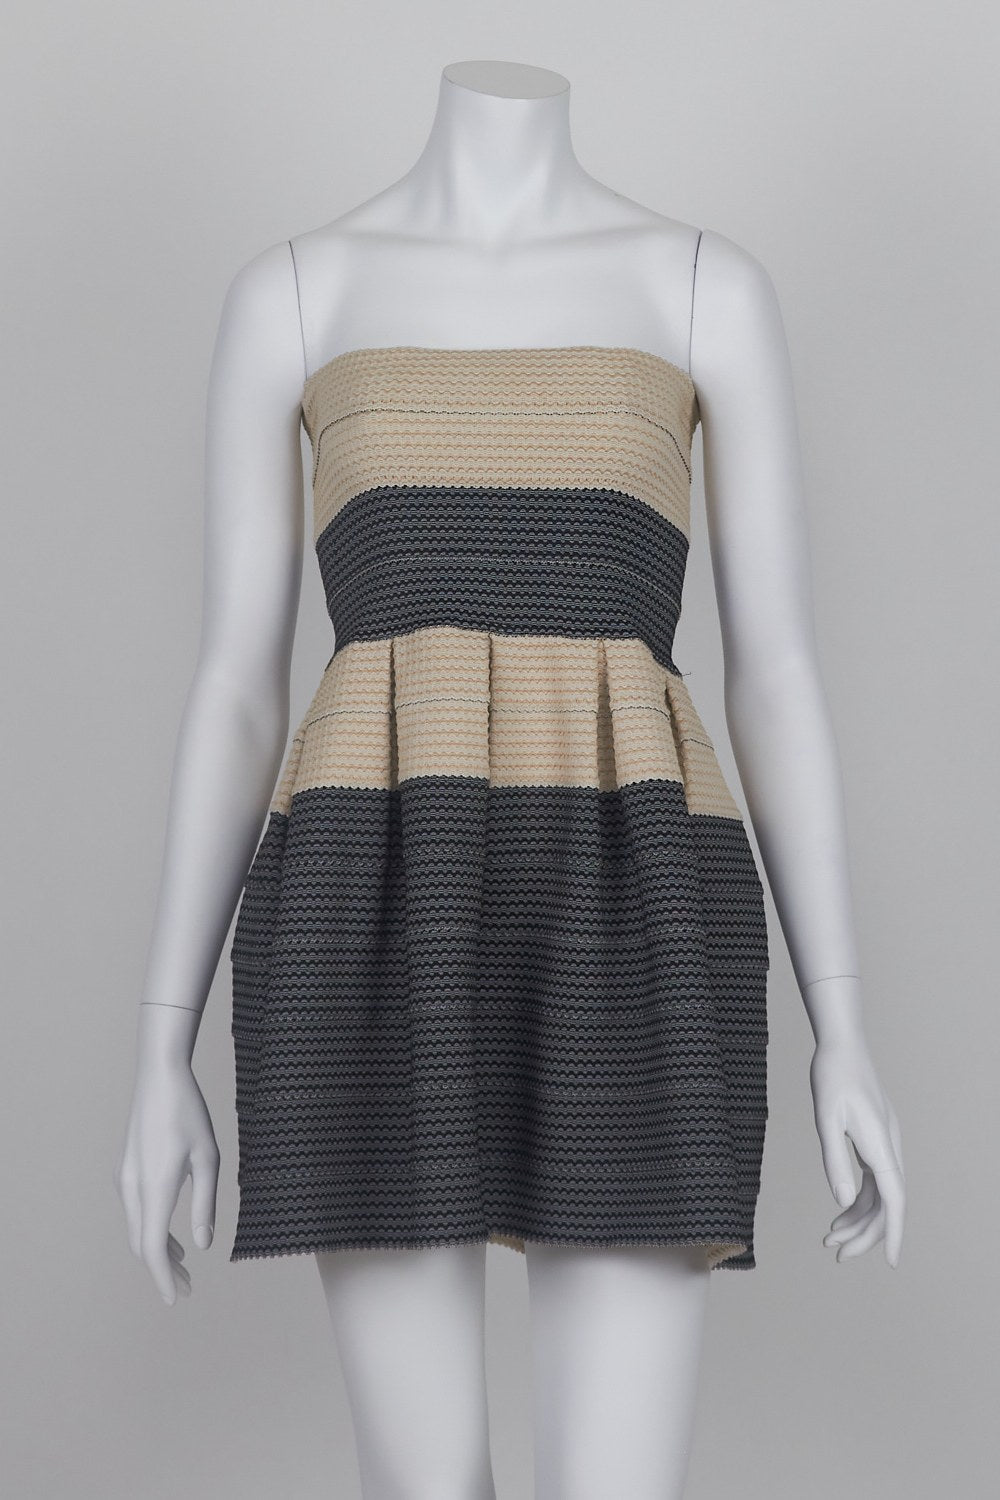 Cooper St Black and Beige Patterned Strapless Pleated Mini Dress 10